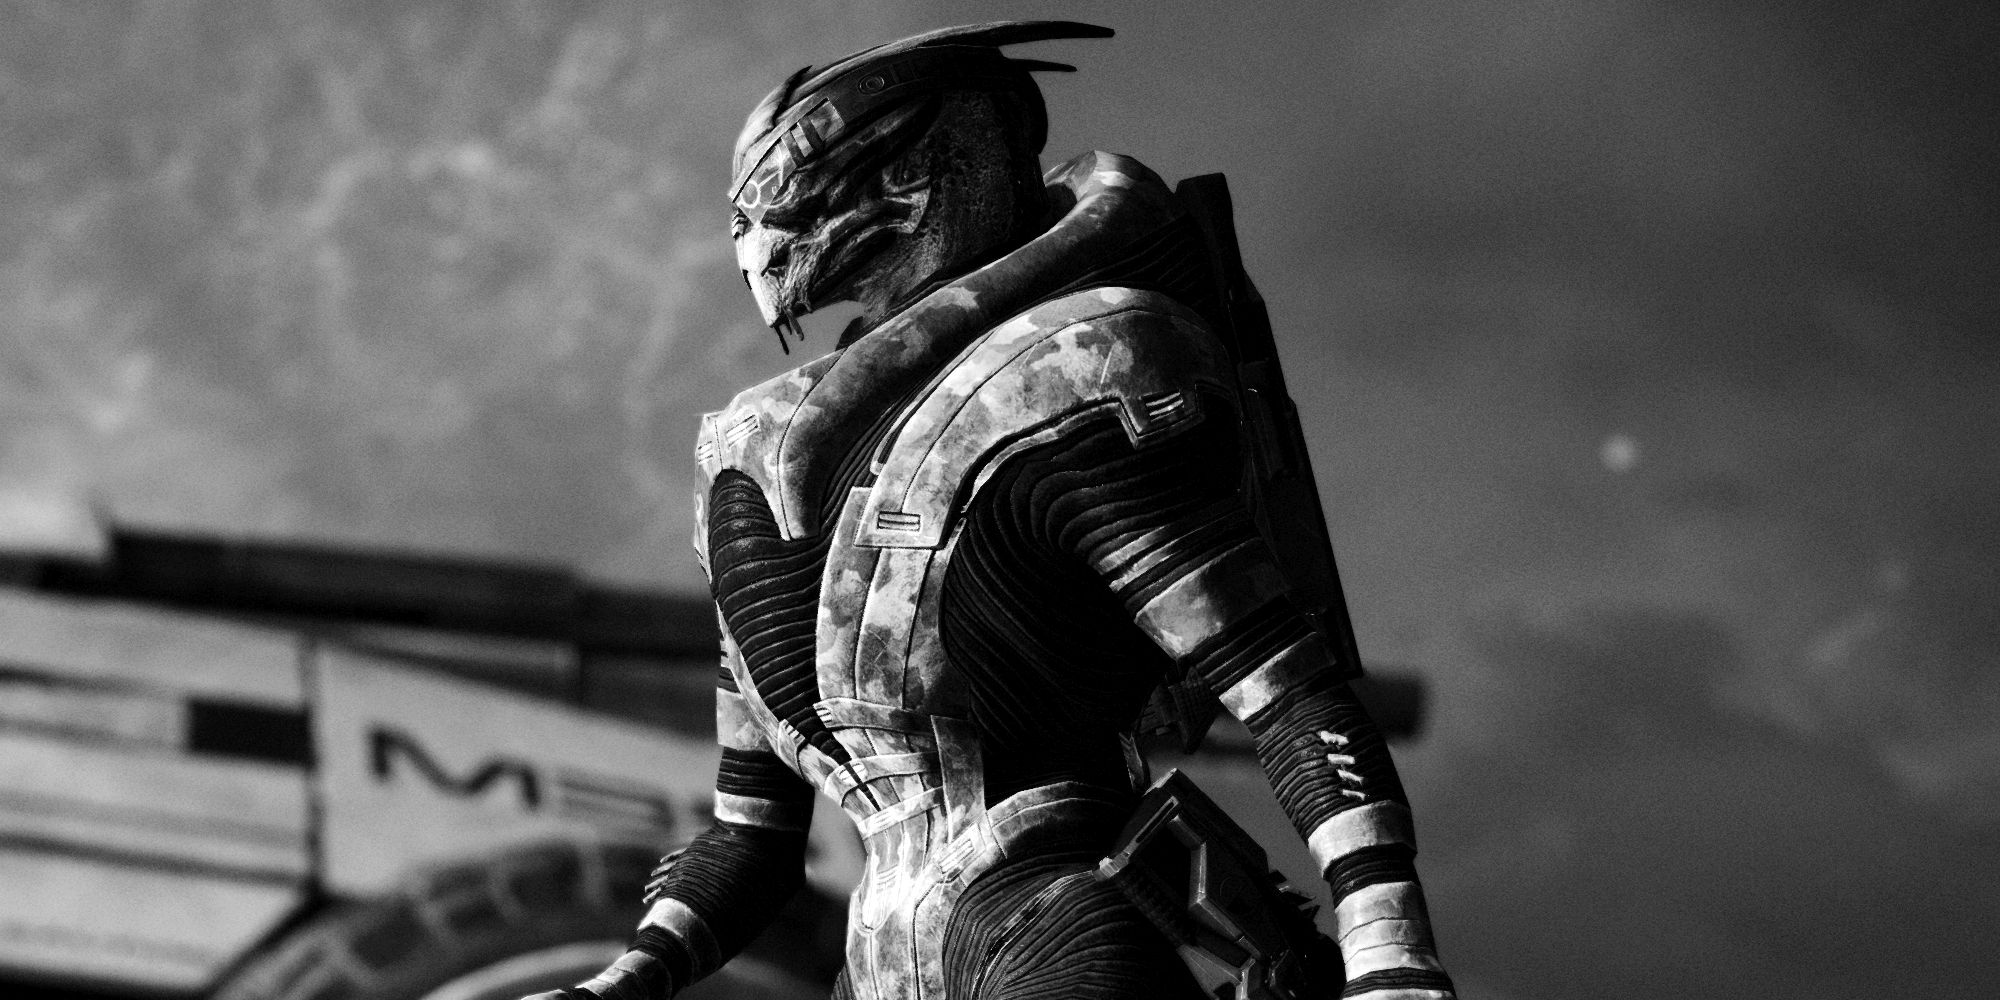 Mass Effect Legendary Edition Photo Mode Confirmed By Project Director